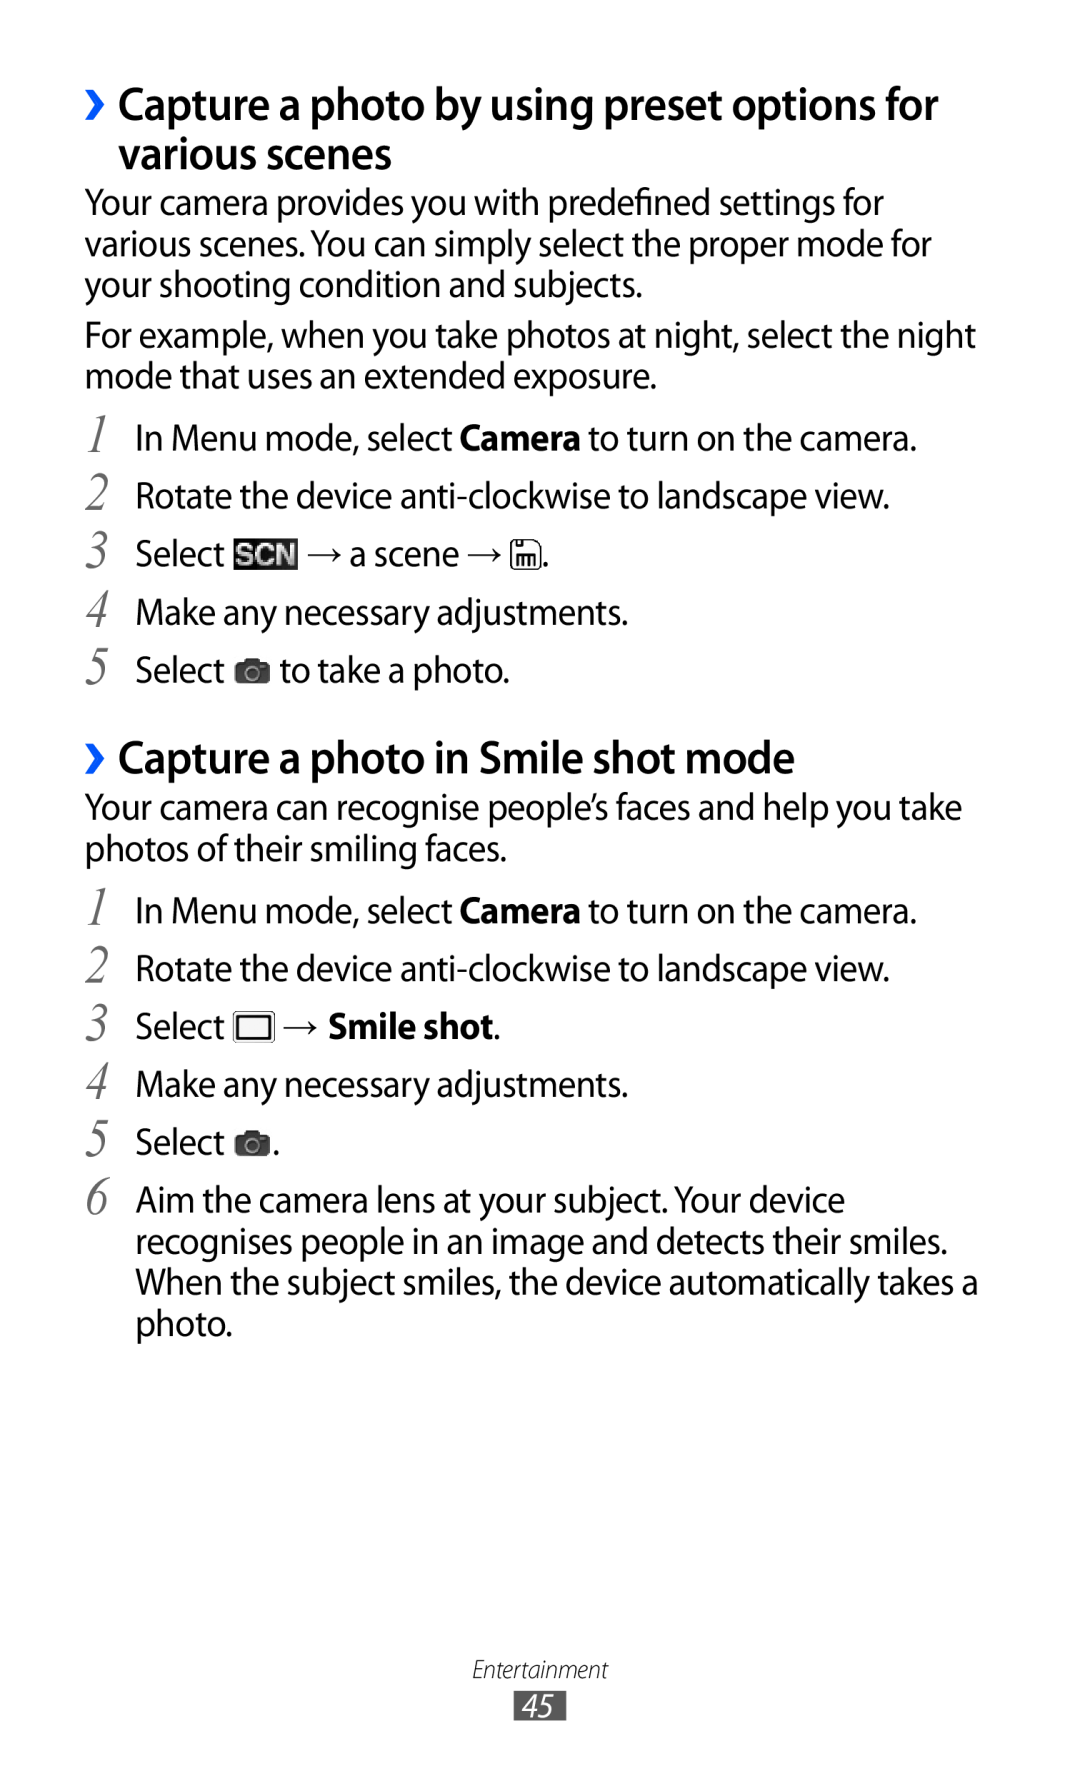 Samsung GT-C6712LKASKZ ››Capture a photo by using preset options for various scenes, ››Capture a photo in Smile shot mode 